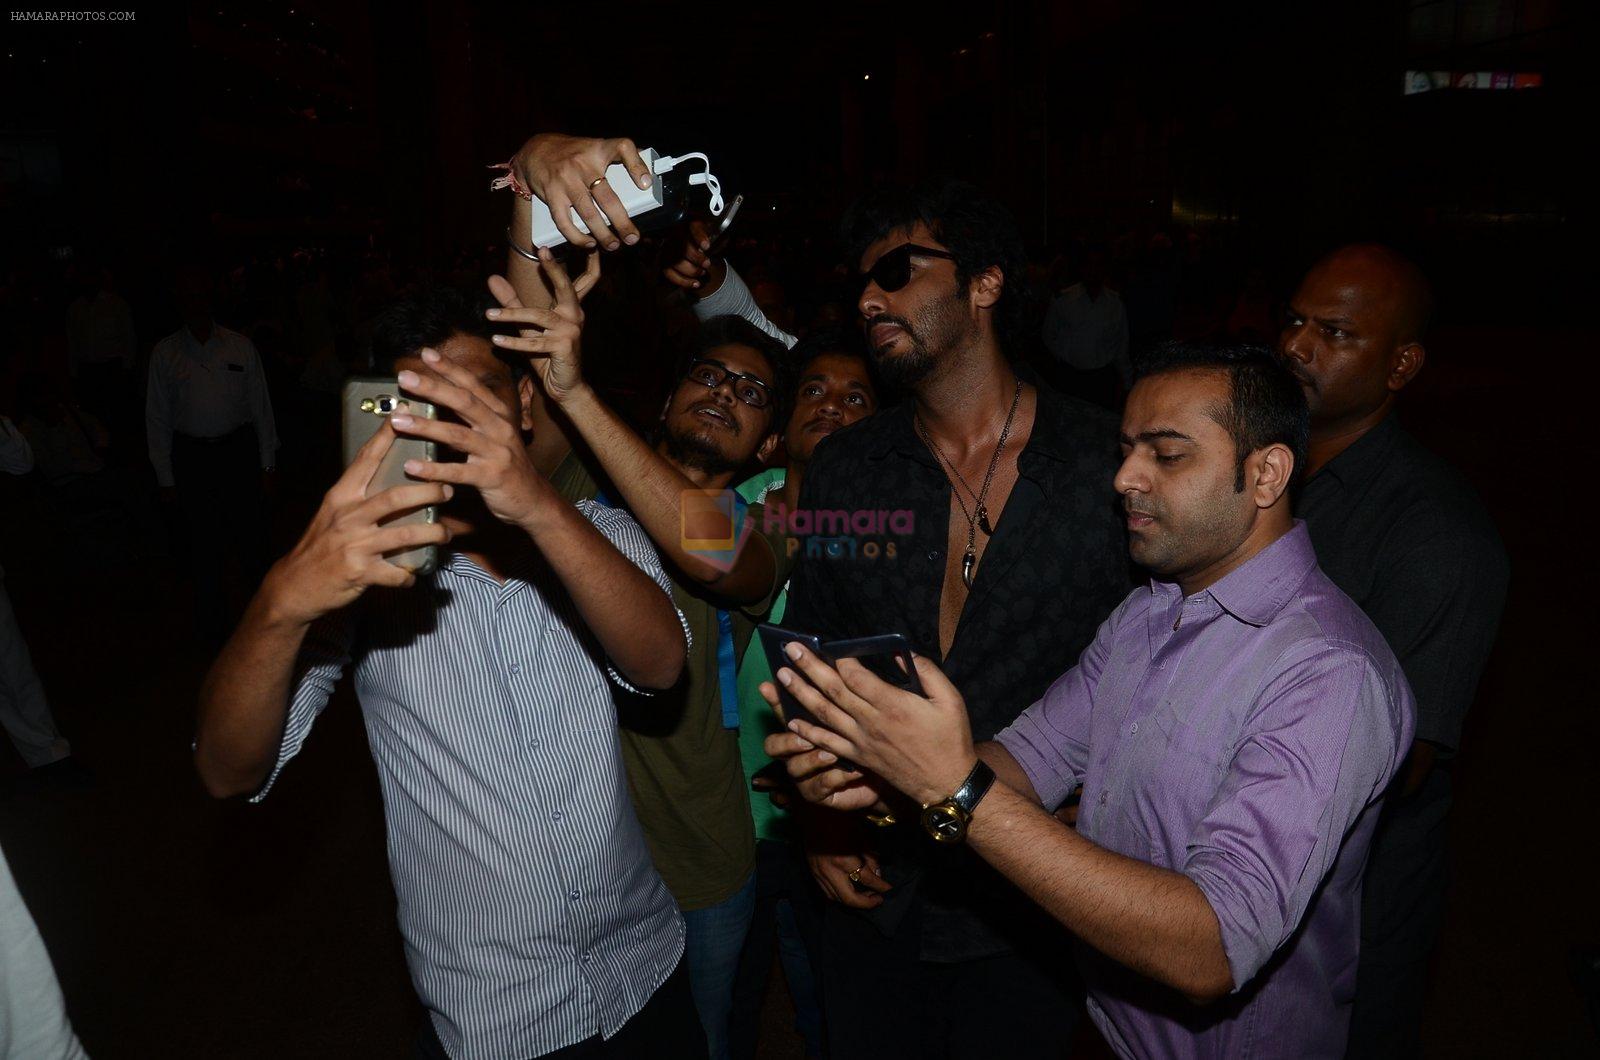 Arjun Kapoor returns from Chandigargh on 18th March 2016